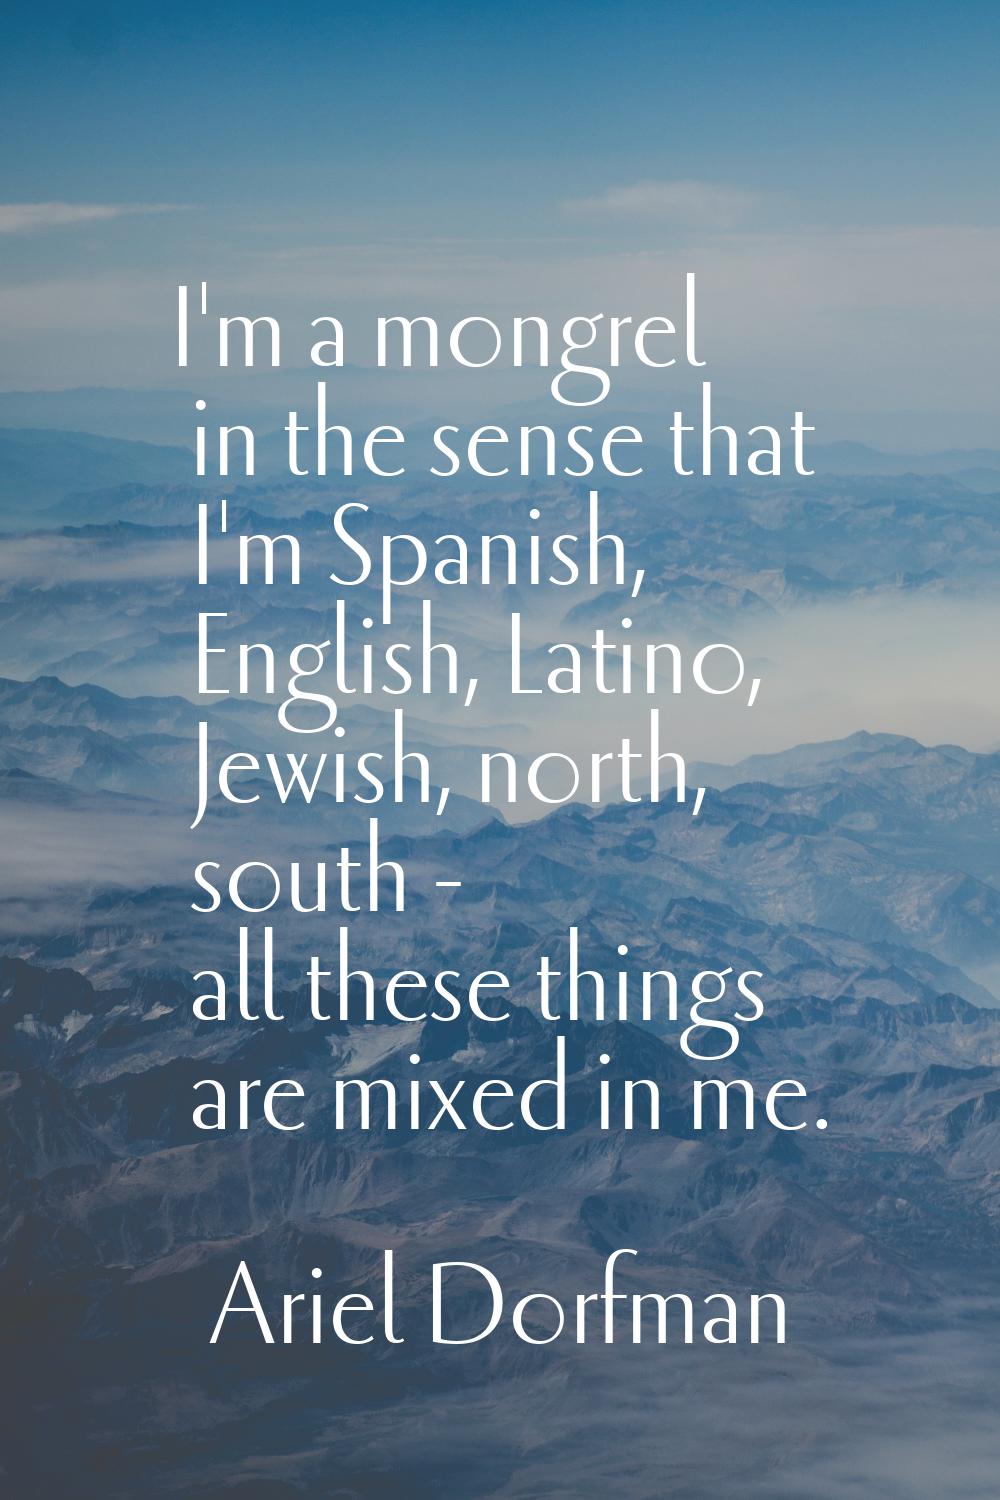 I'm a mongrel in the sense that I'm Spanish, English, Latino, Jewish, north, south - all these thin